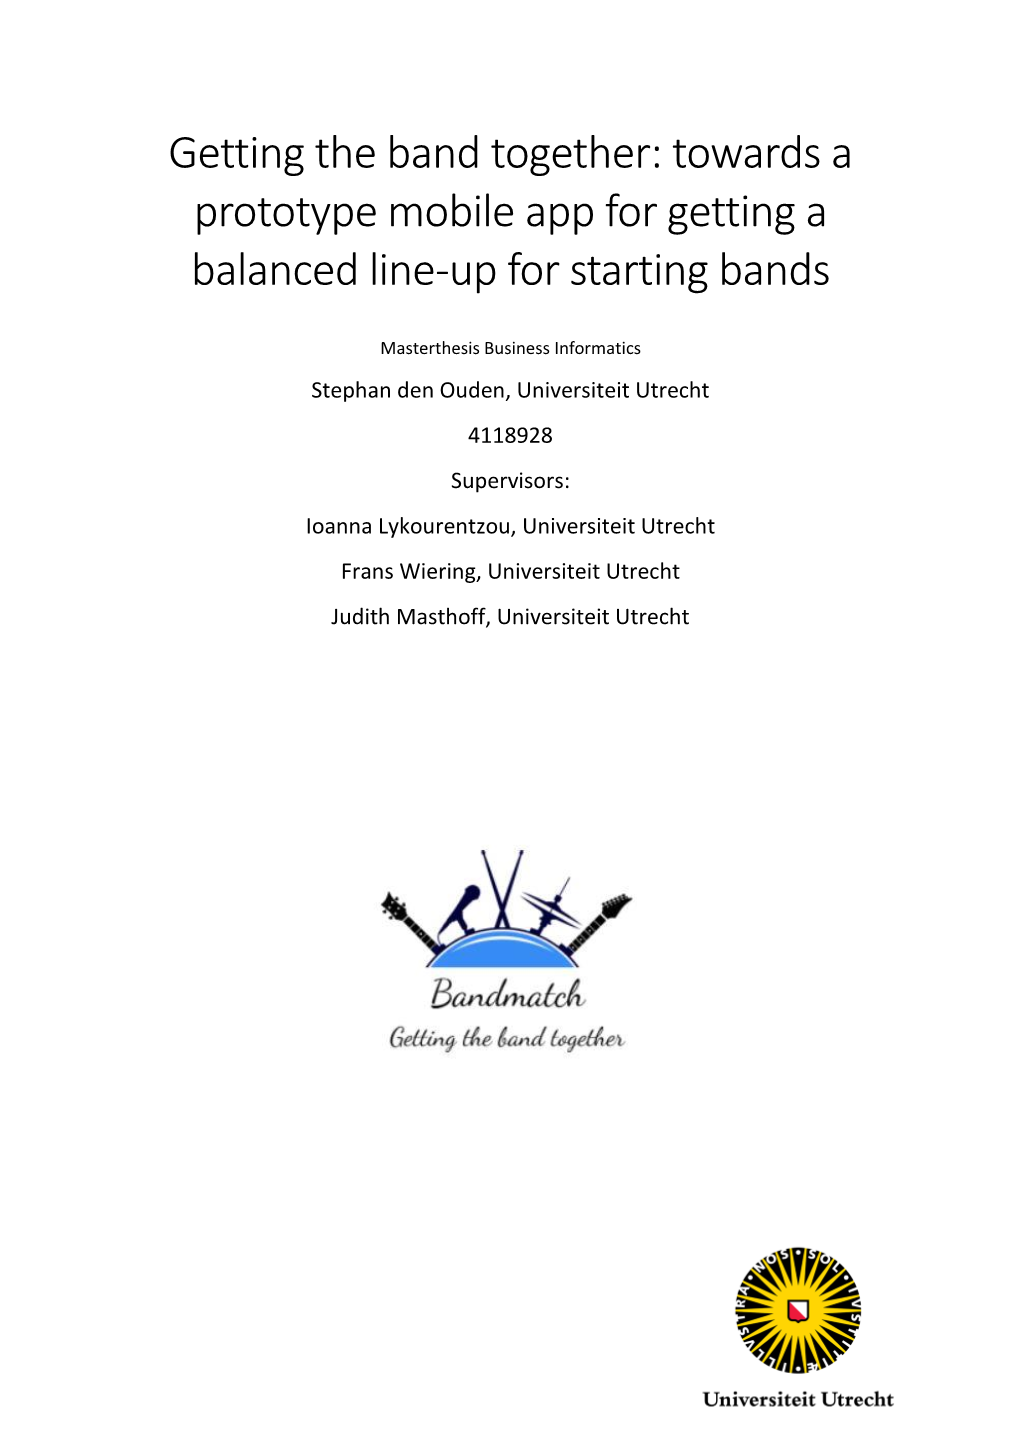 Getting the Band Together: Towards a Prototype Mobile App for Getting a Balanced Line-Up for Starting Bands